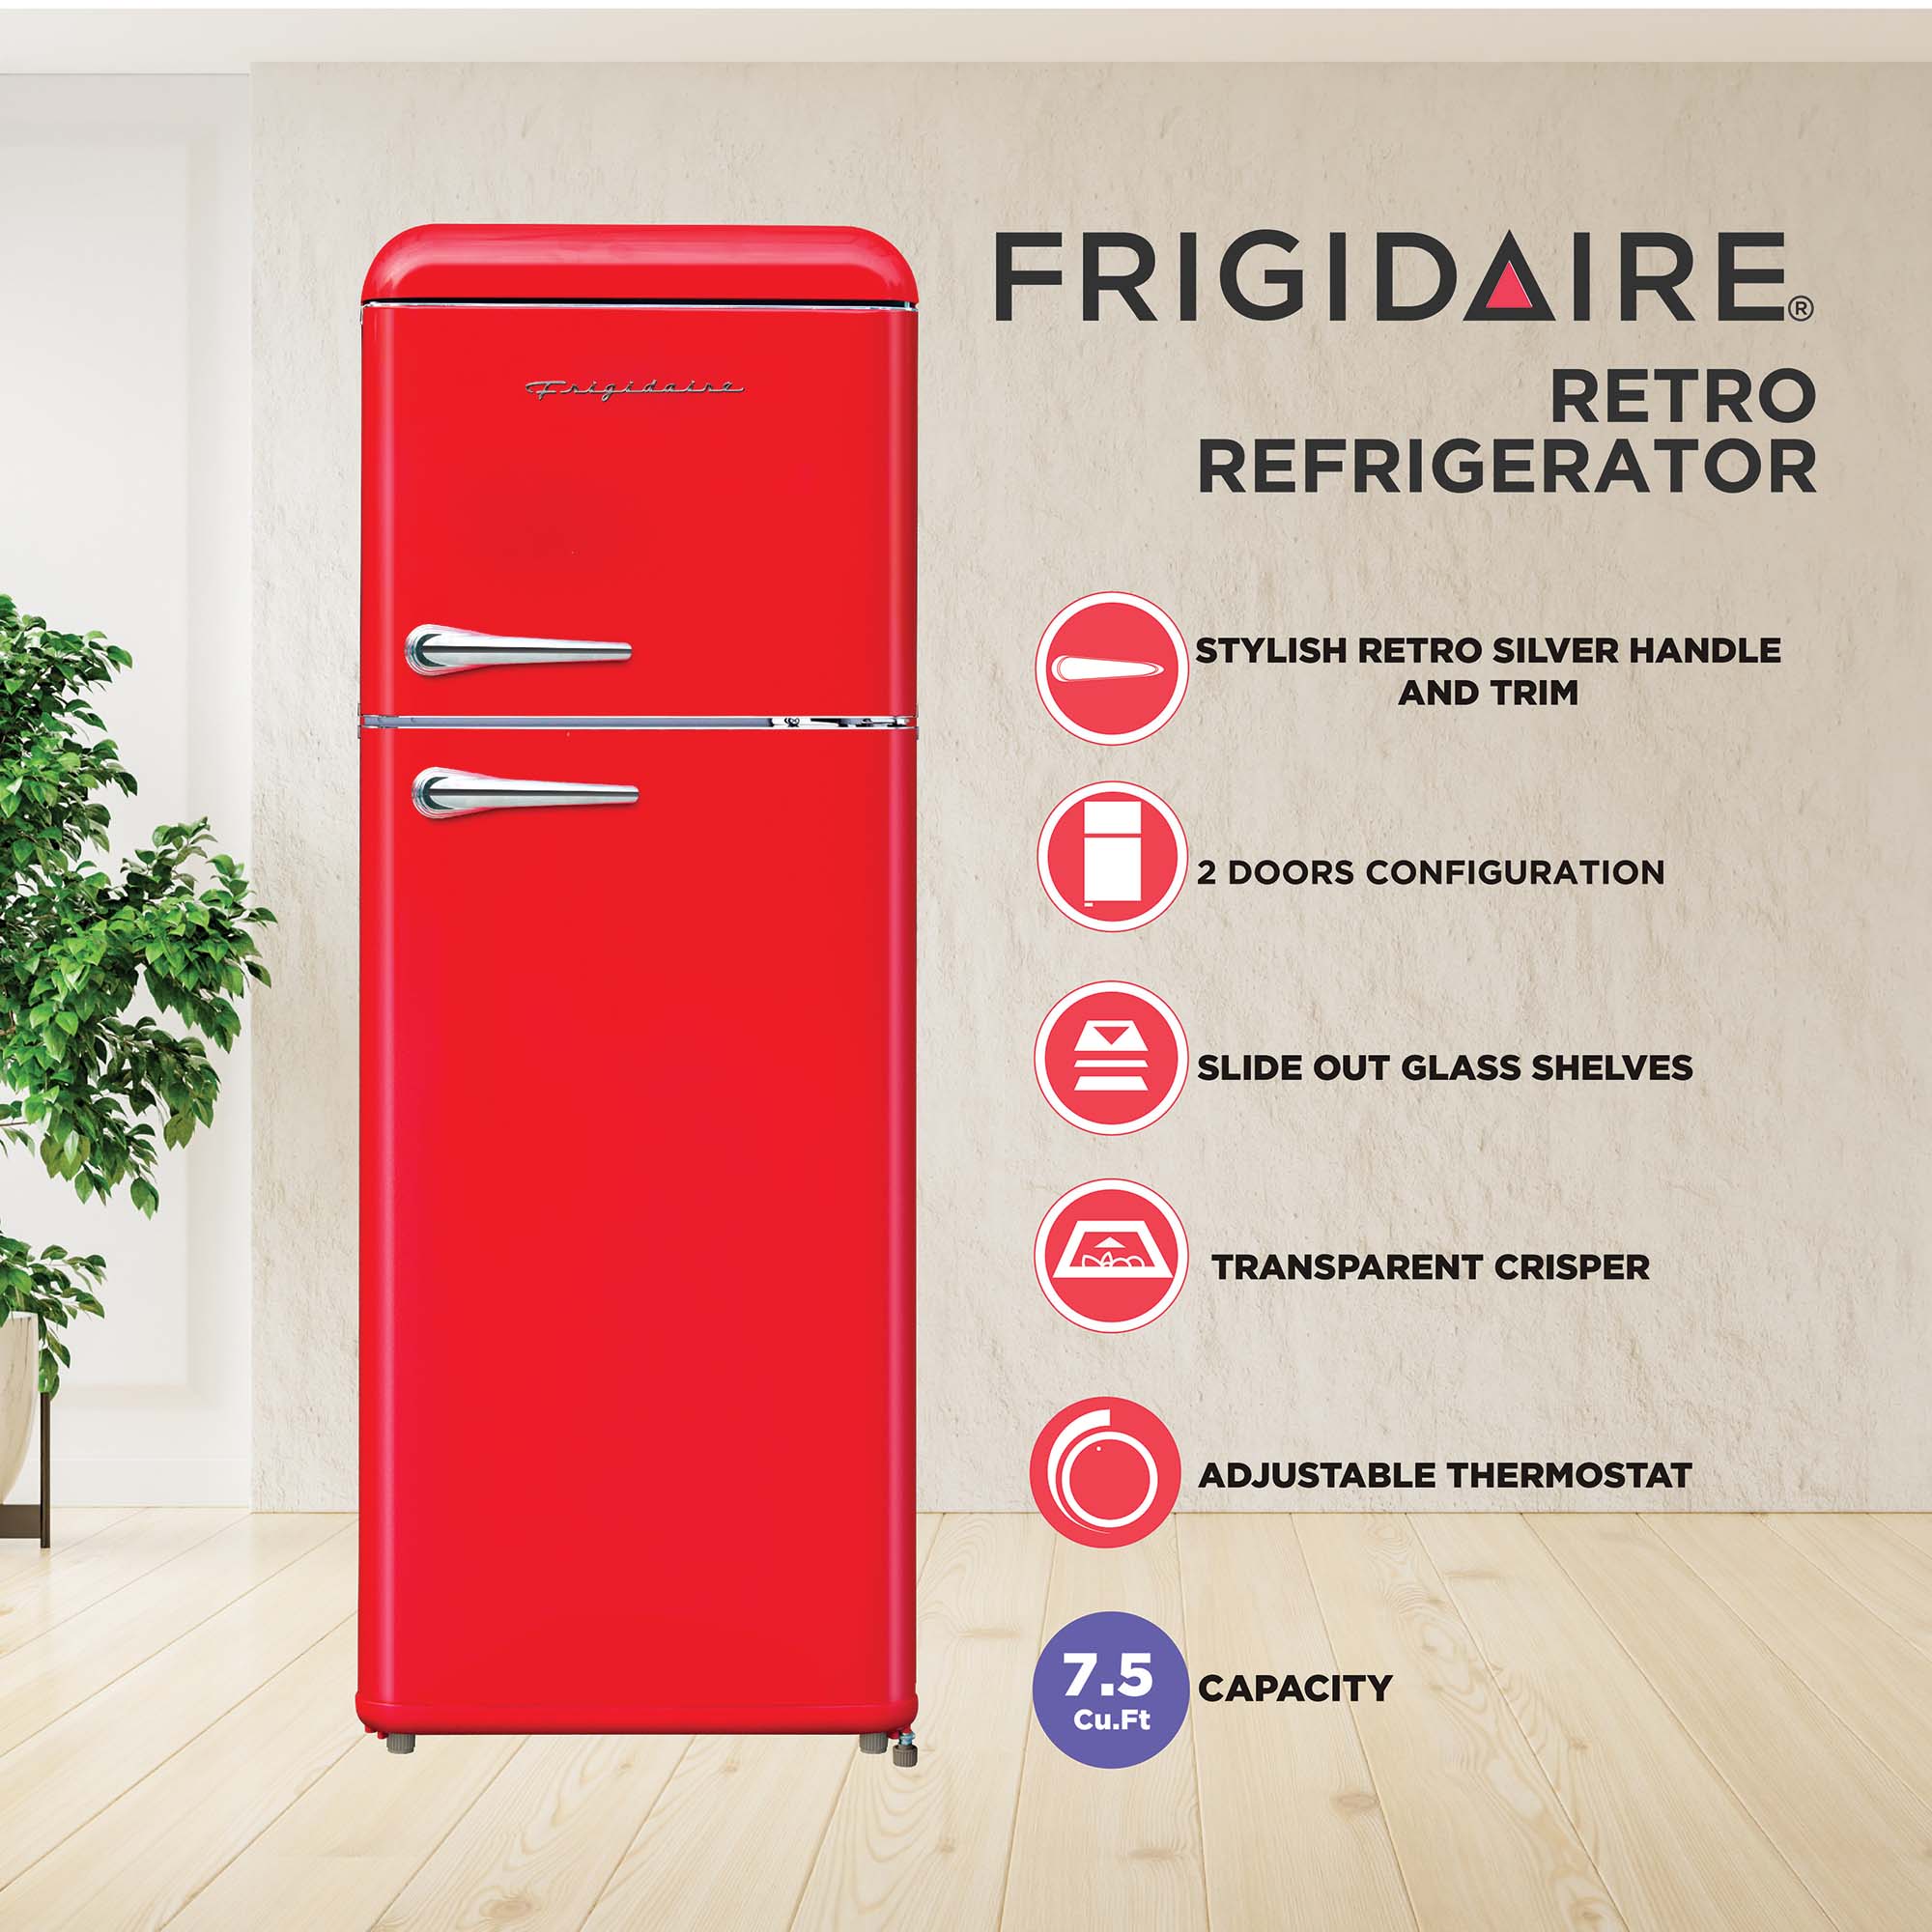 Frigidaire 7.5 Cu. Ft. Top Freezer Refrigerator in RED, Rounded Corners - RETRO, EFR756 - image 5 of 5